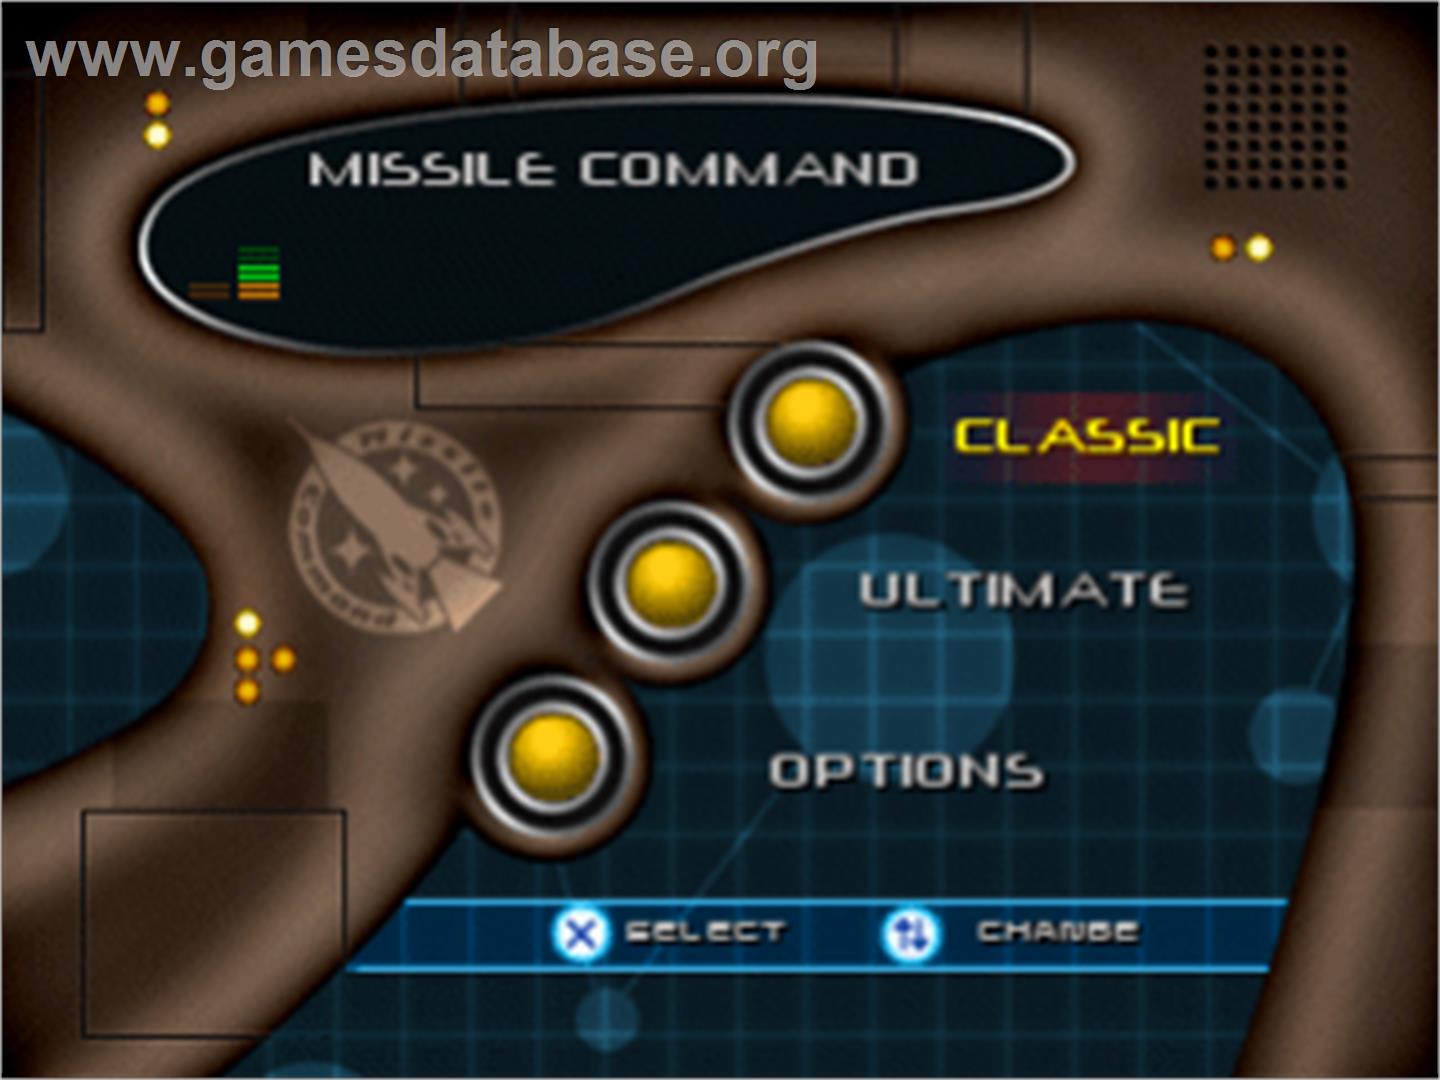 Missile Command - Sony Playstation - Artwork - Title Screen